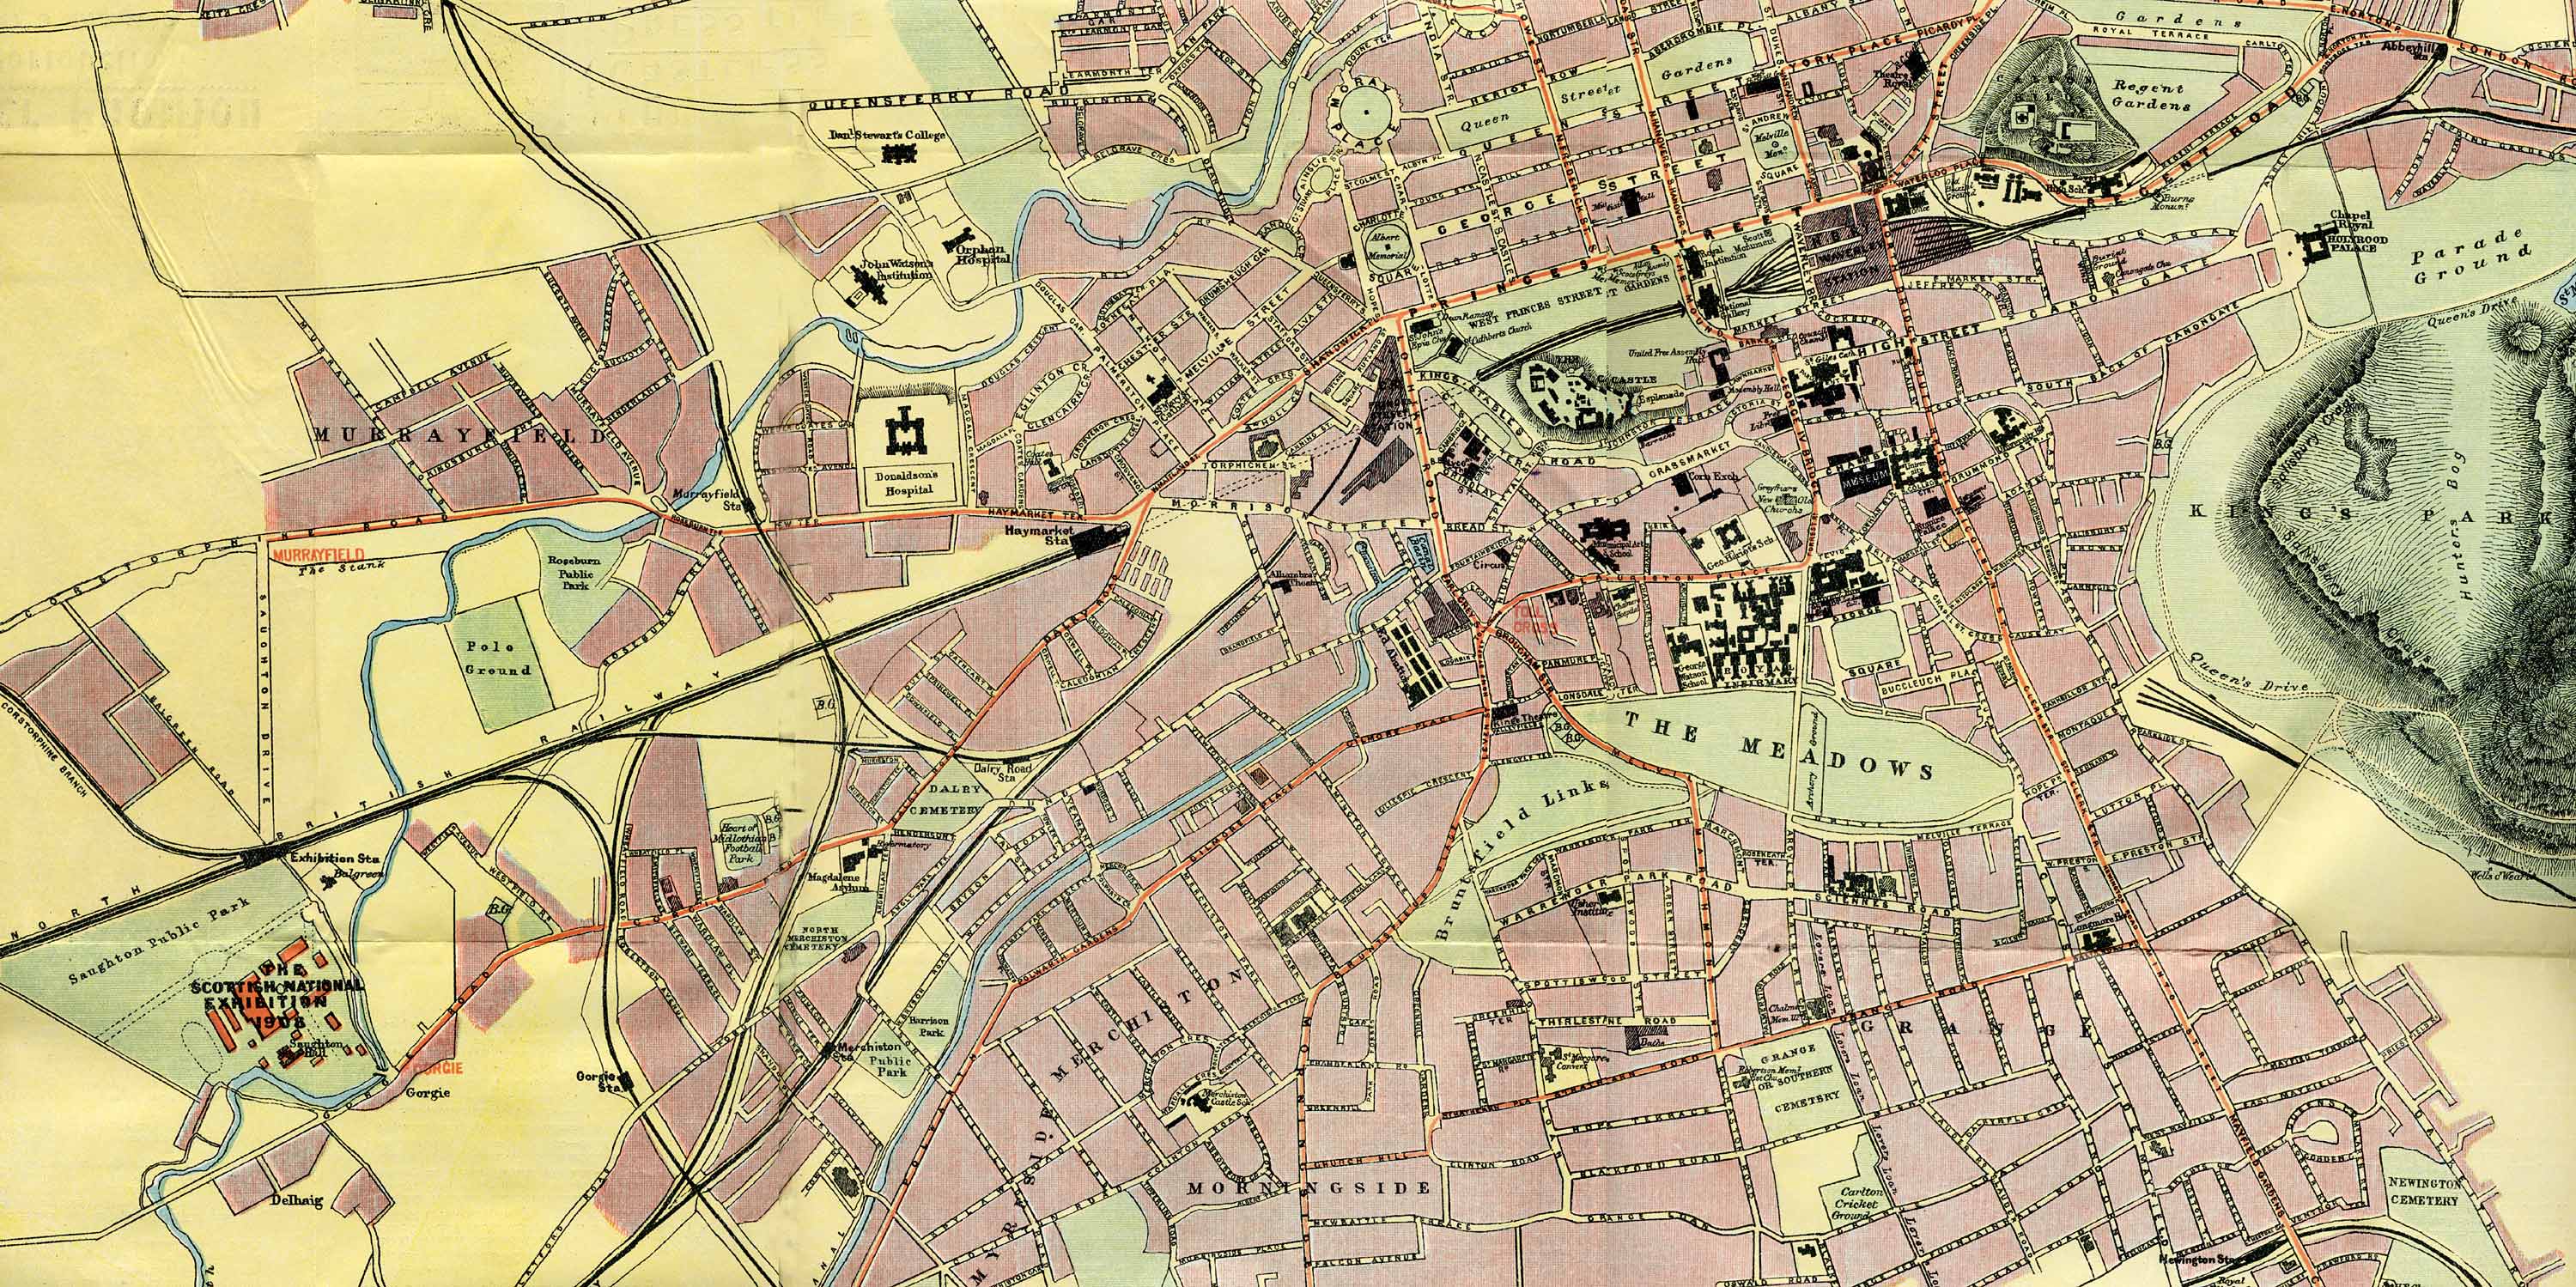 Pulsford's Map of the 1908 Exhibition  -  Enlarged